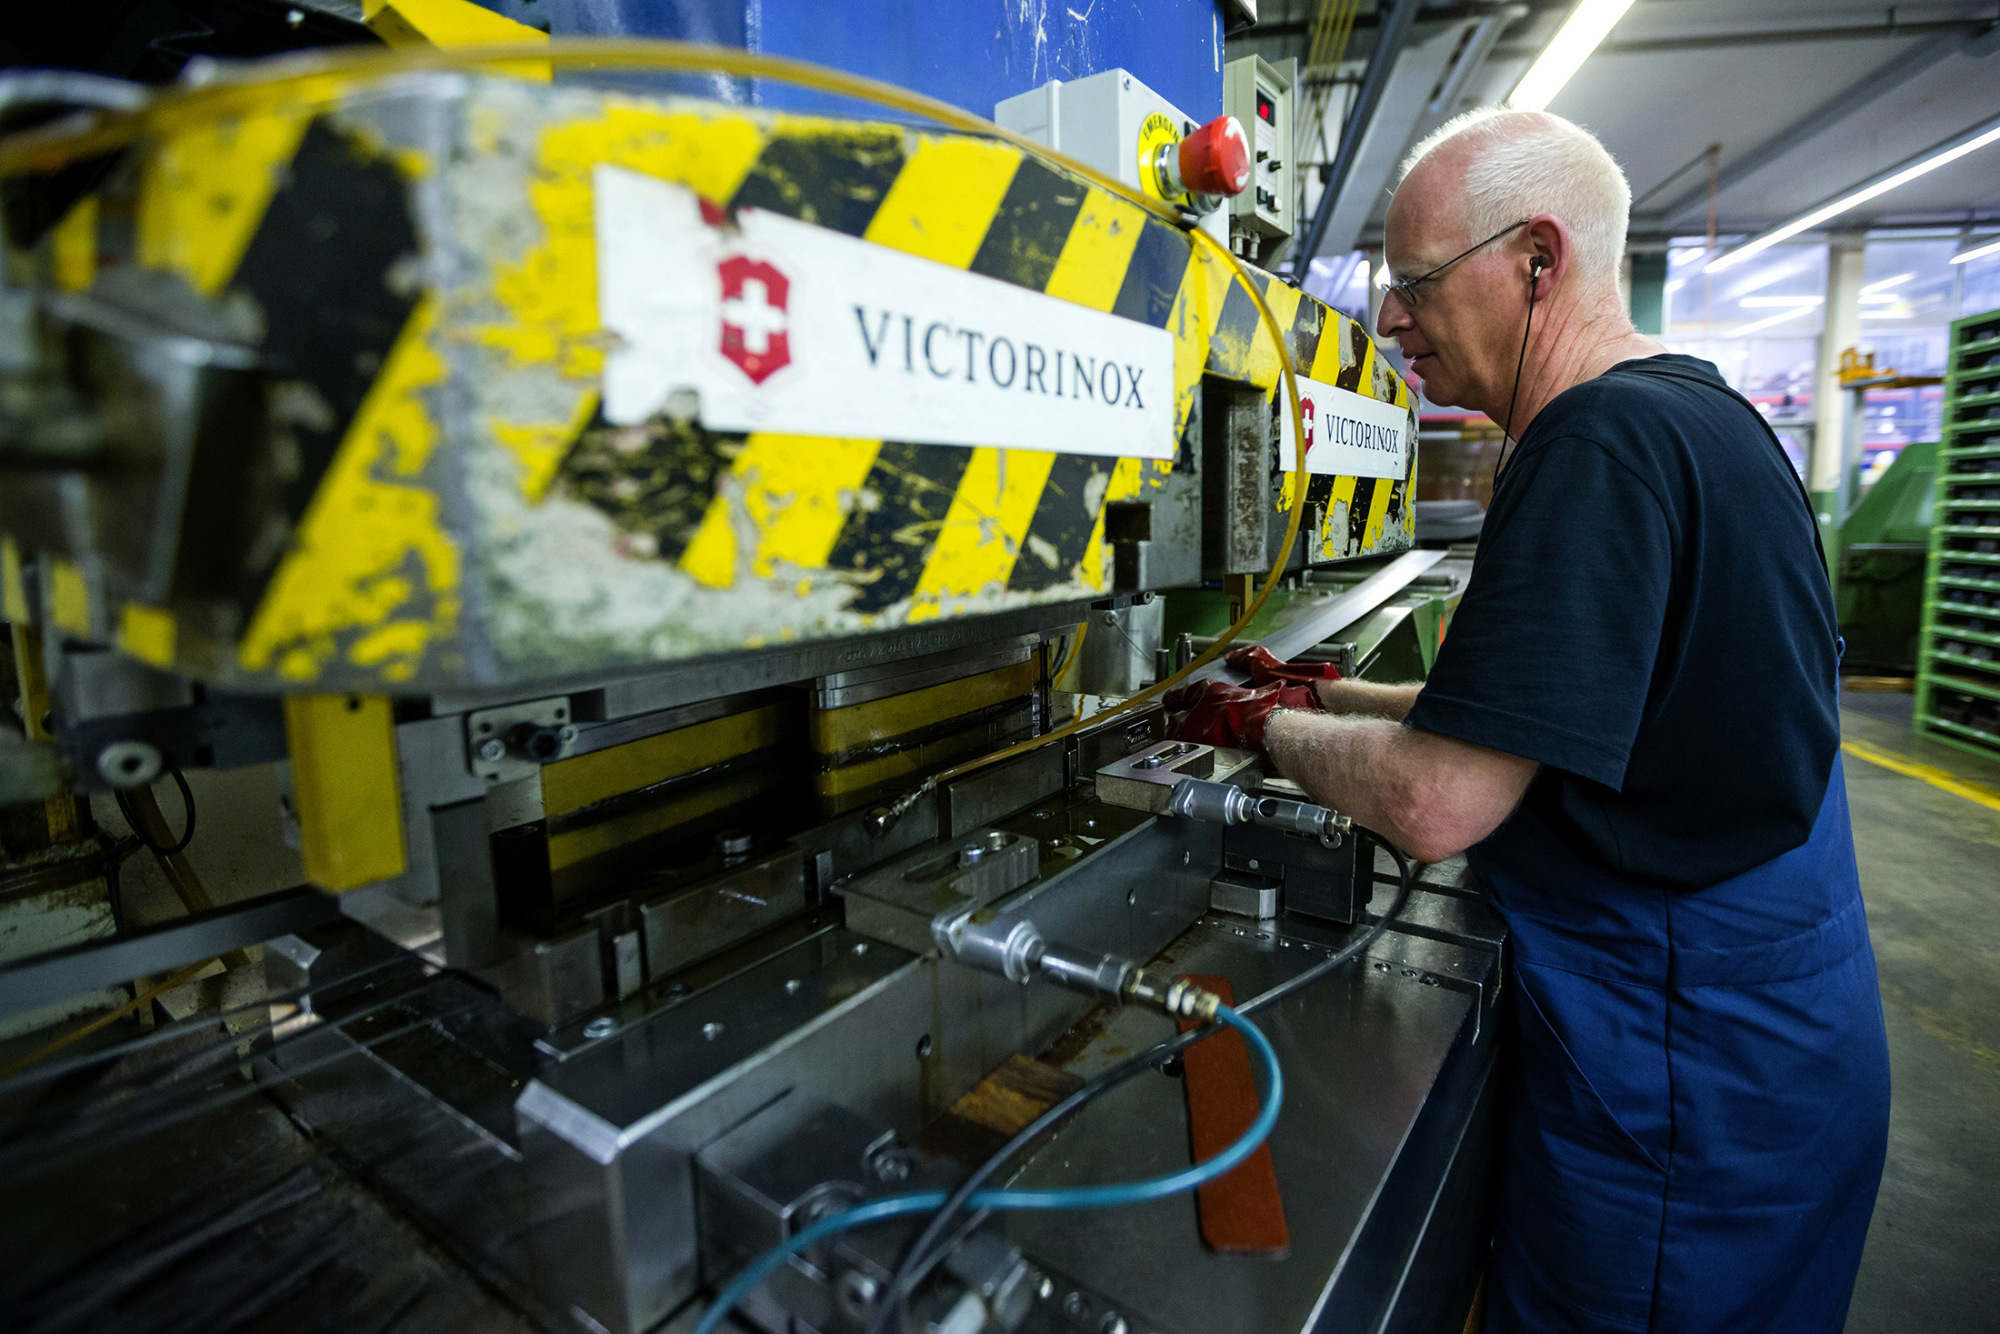 An employee feeds a sheet of steel into a cutting machine to make the blades of Swiss Army knives, produced by Victorinox AG, at the company's manufacturing plant in Ibach, Switzerland, on Tuesday, September 9, 2014. The Swiss National Bank's three-year-old cap on the franc has helped the economy outperform that of the euro area in nine of the last 12 quarters.
